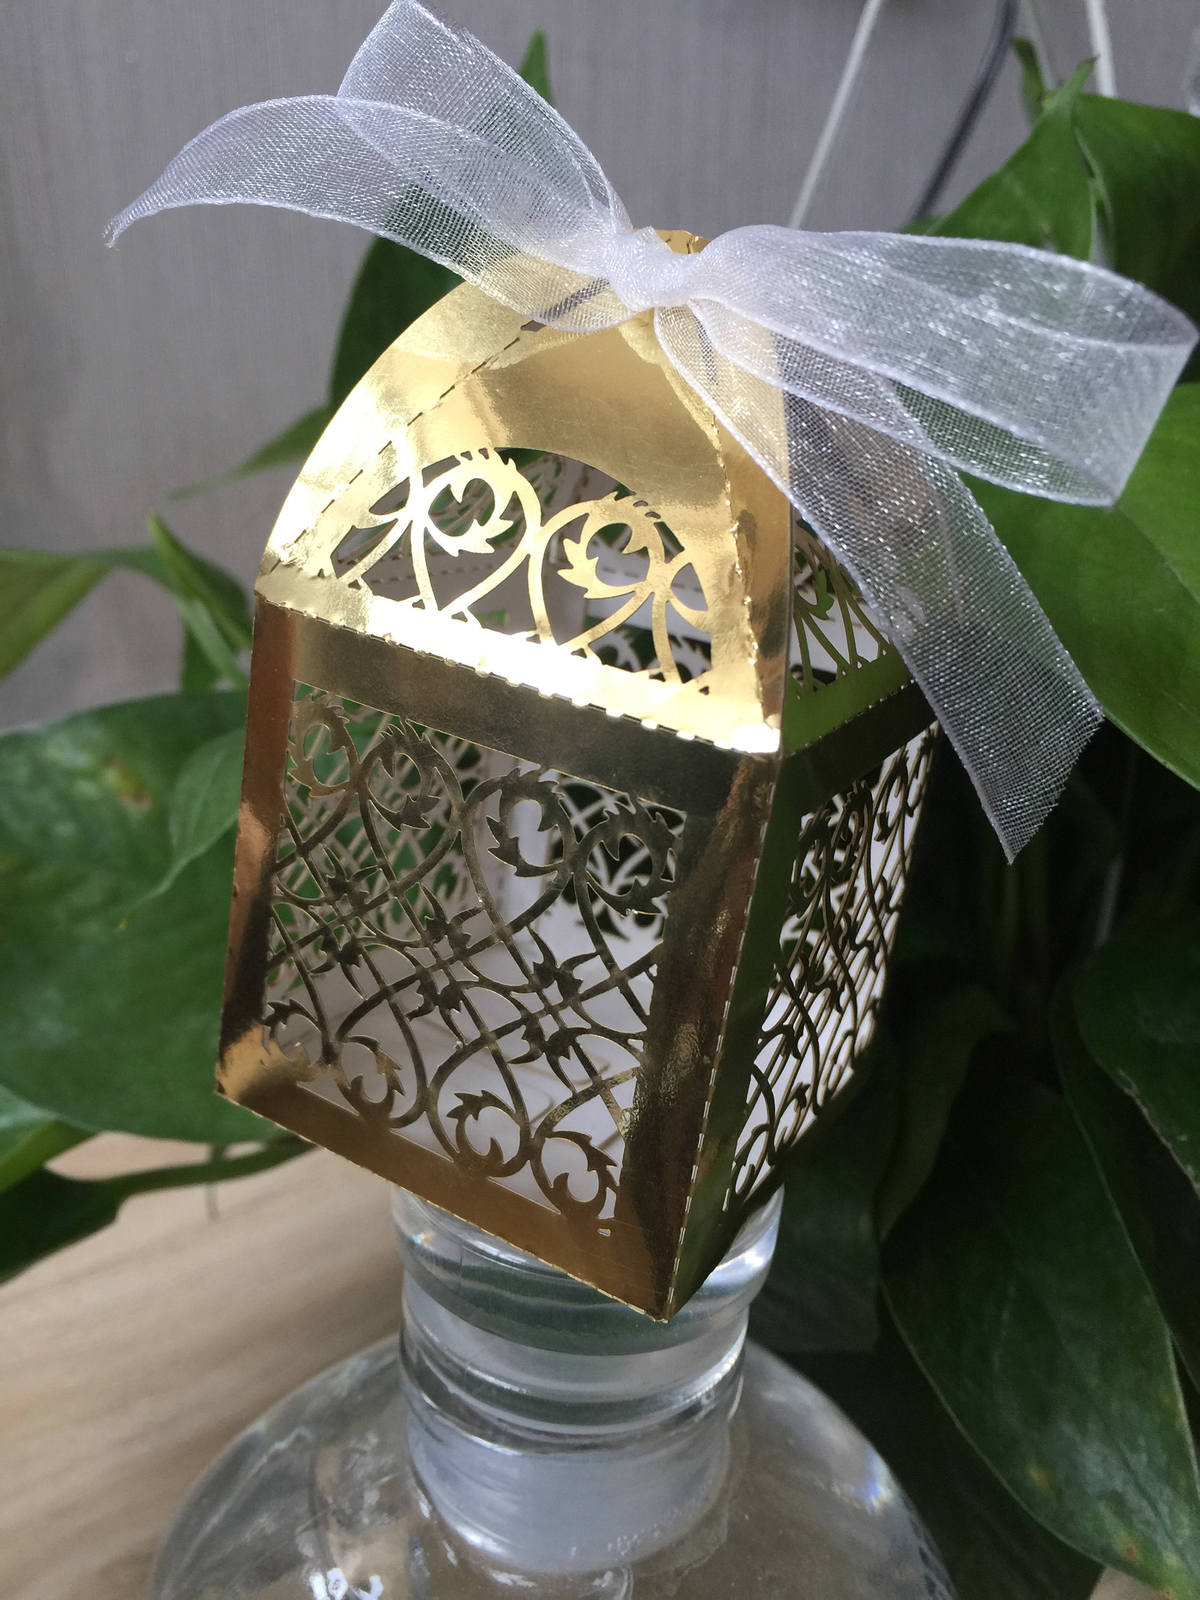 100pcs Metallic Gold Laser Cut Gift Packaging Boxes With Ribbon,Wedding Favors